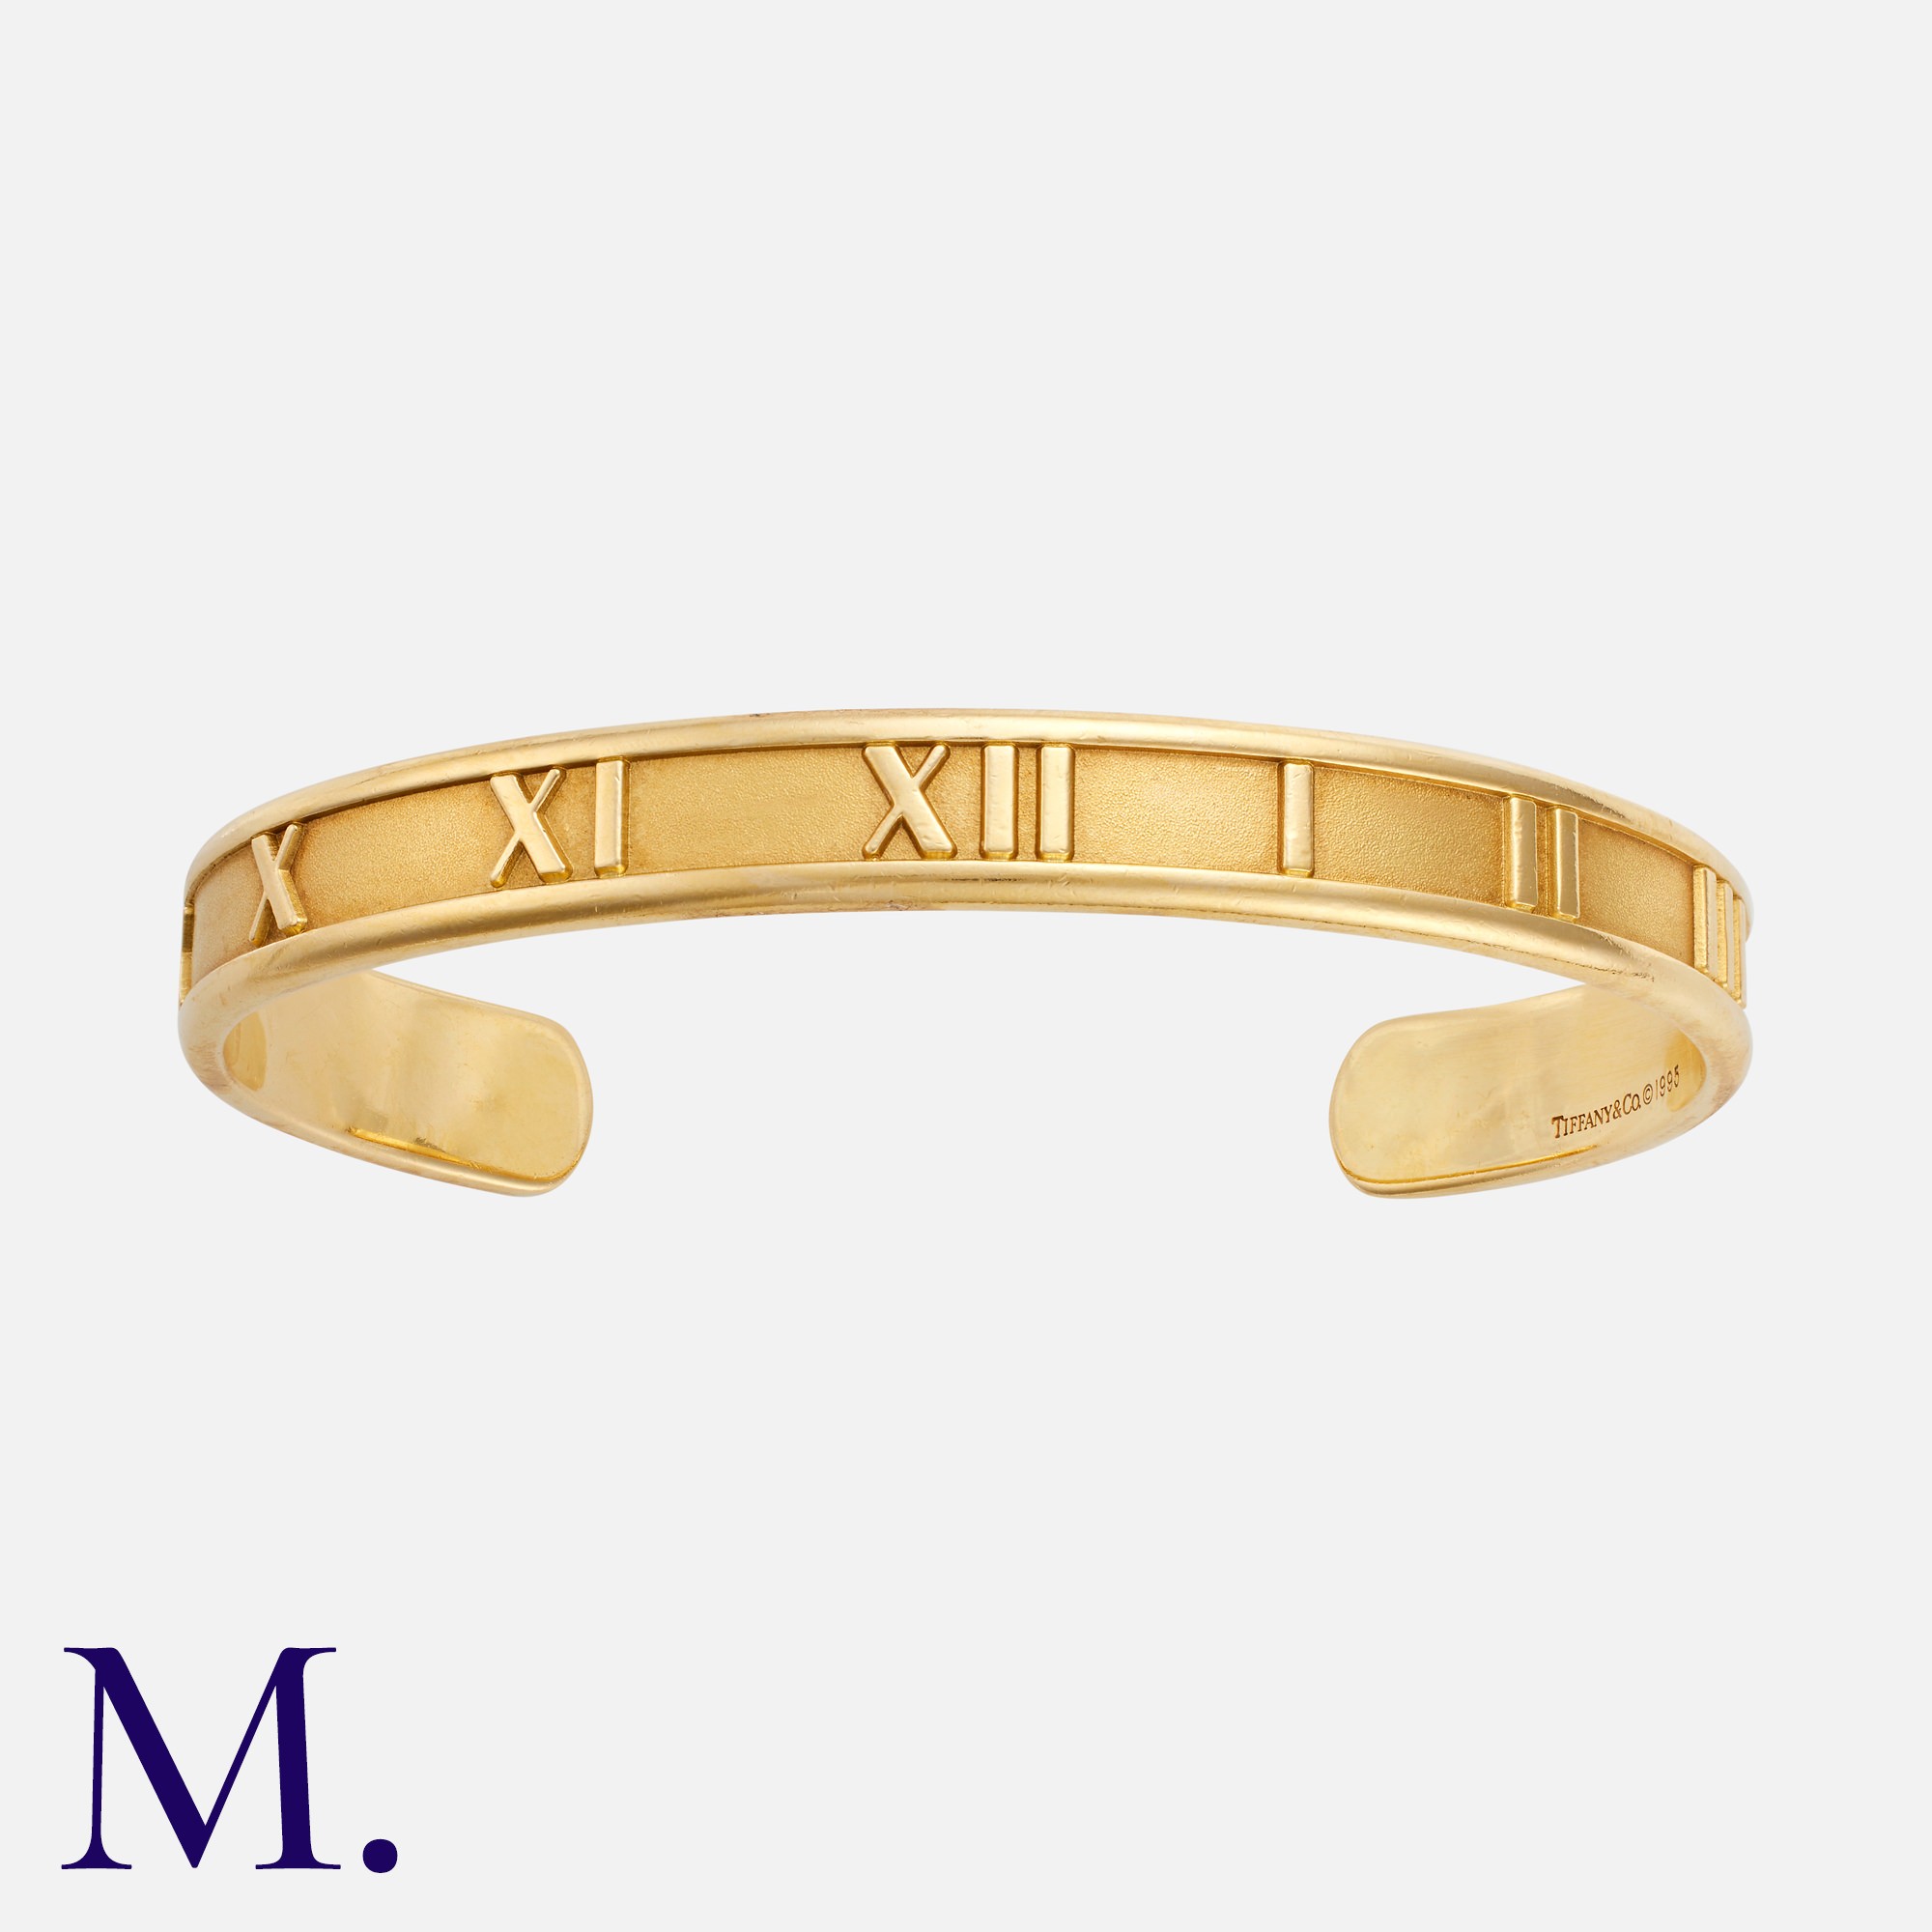 TIFFANY & CO. An Atlas Bangle in 18K yellow gold, signed Tiffany & Co and marked for 18ct gold.